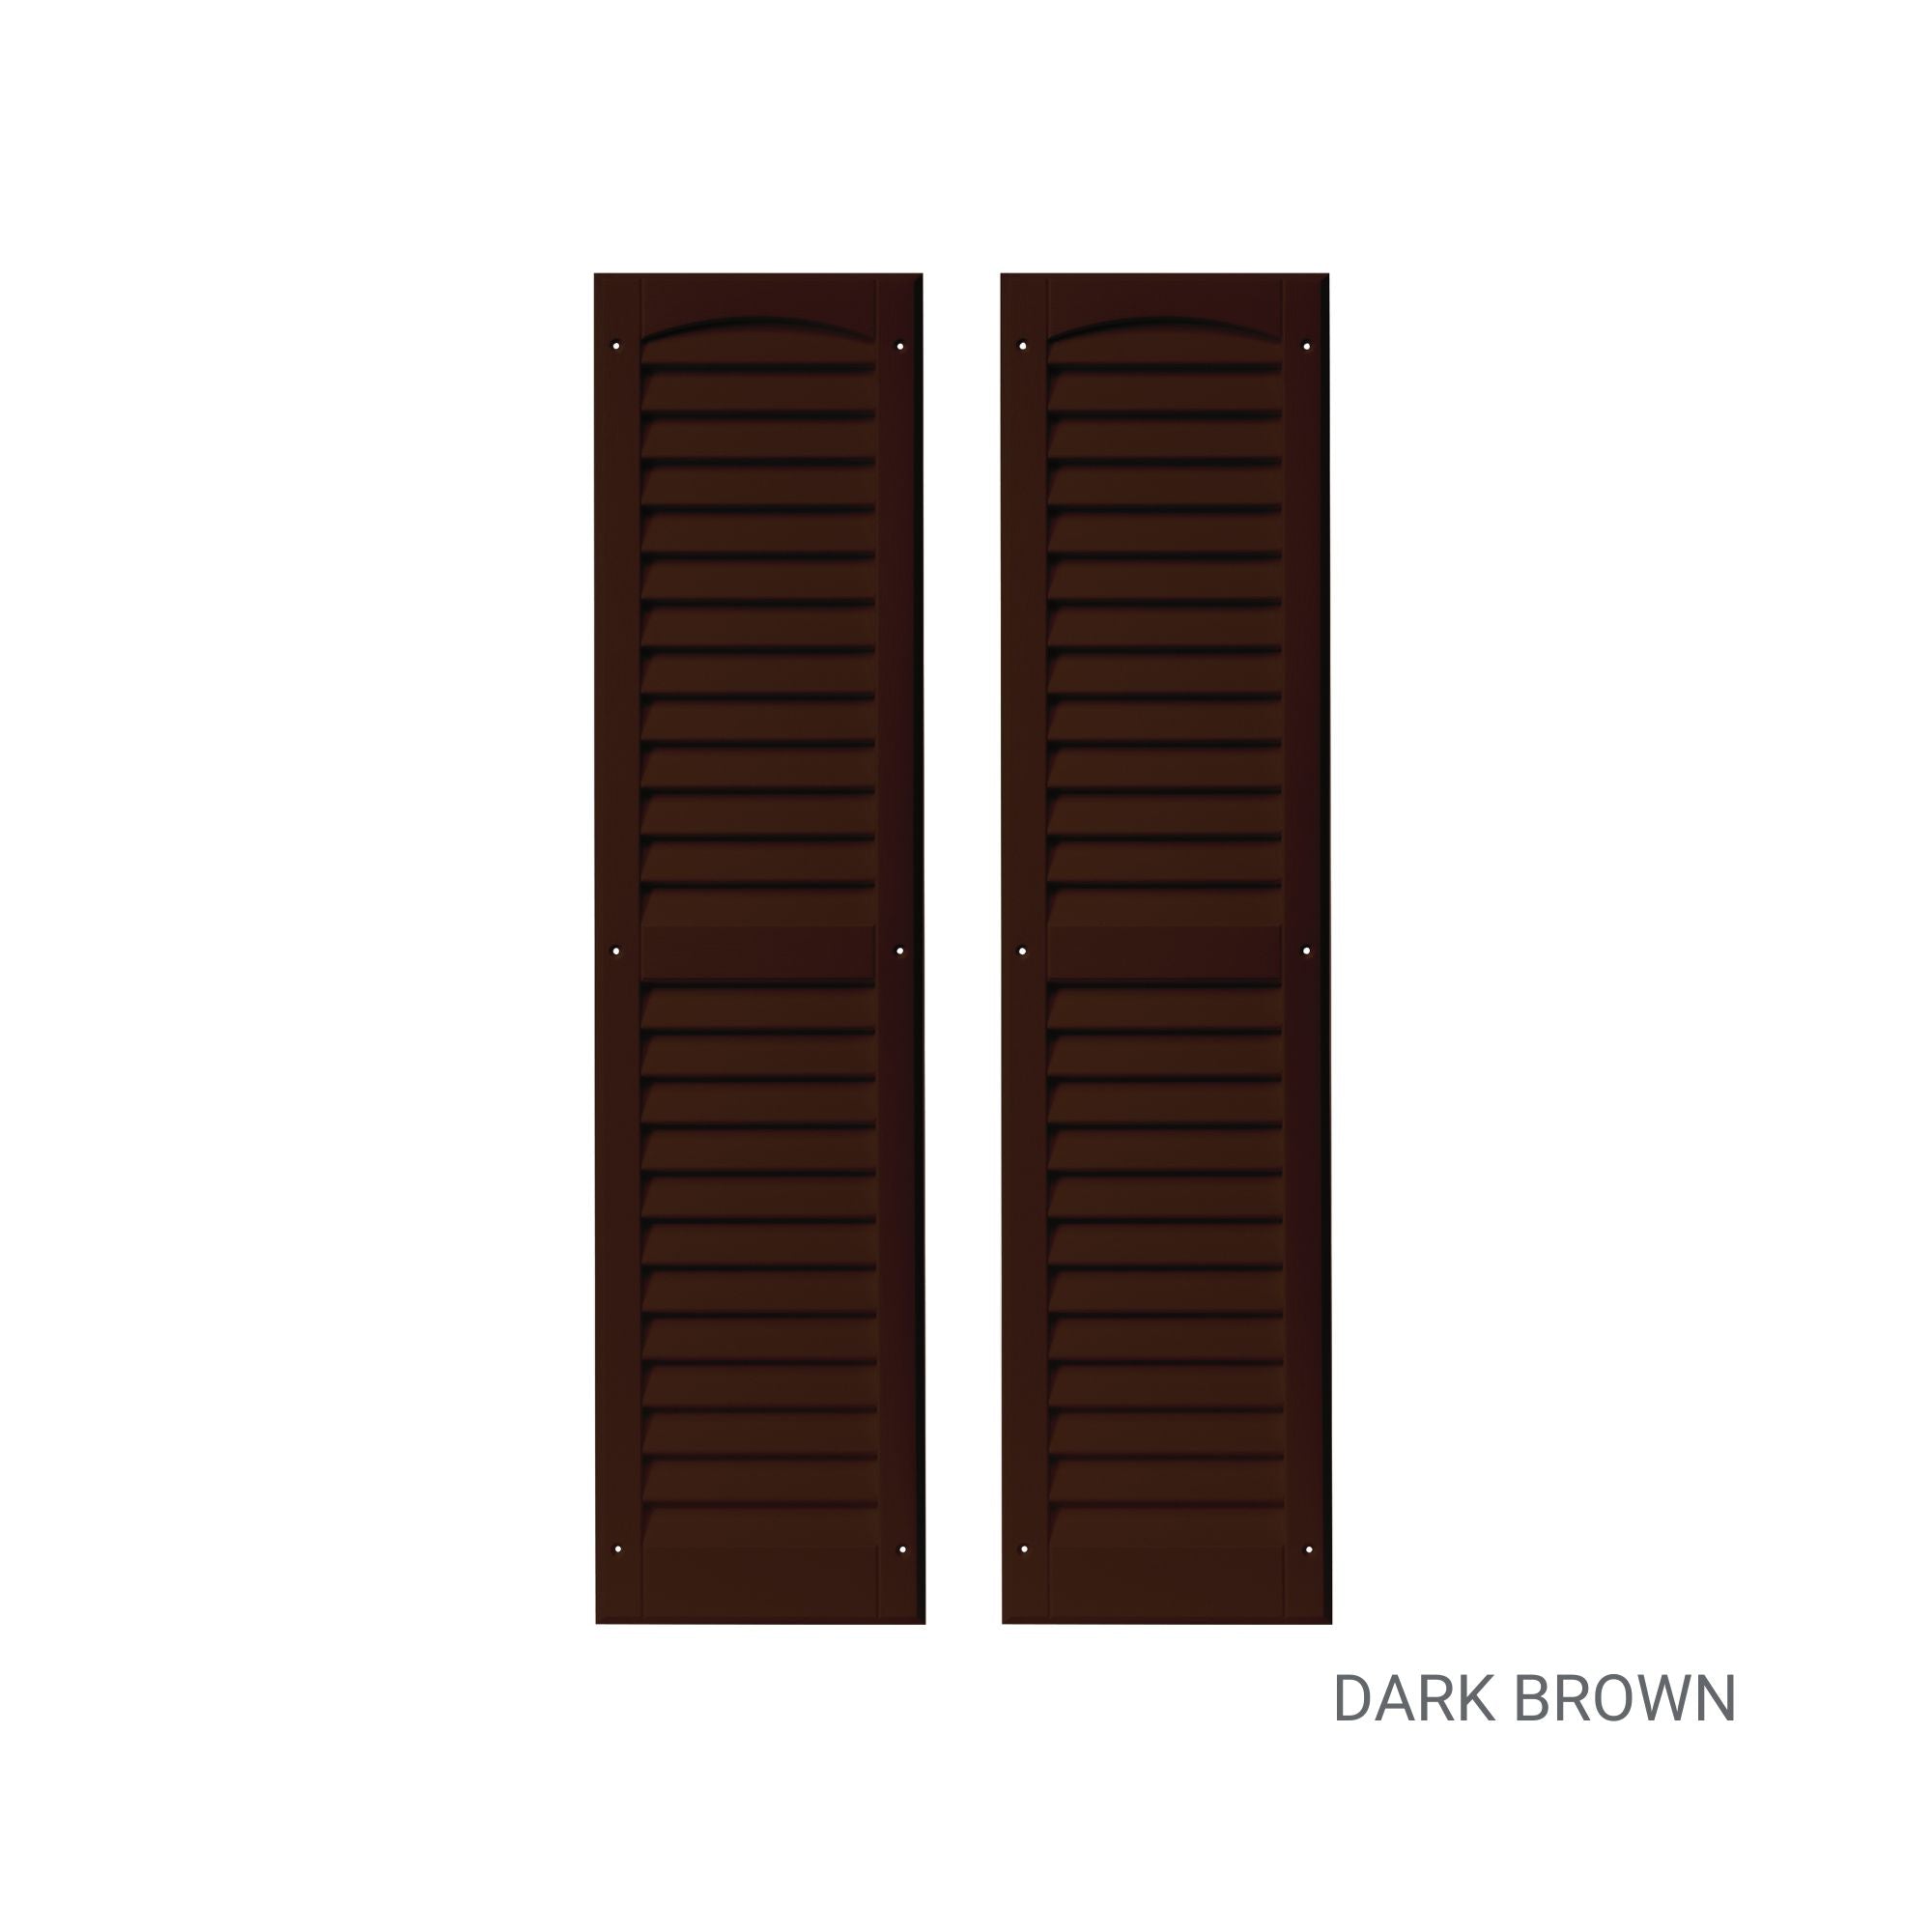 Pair of 9" W x 36" H Louvered Dark Brown Shutters for Sheds, Playhouses, and MORE